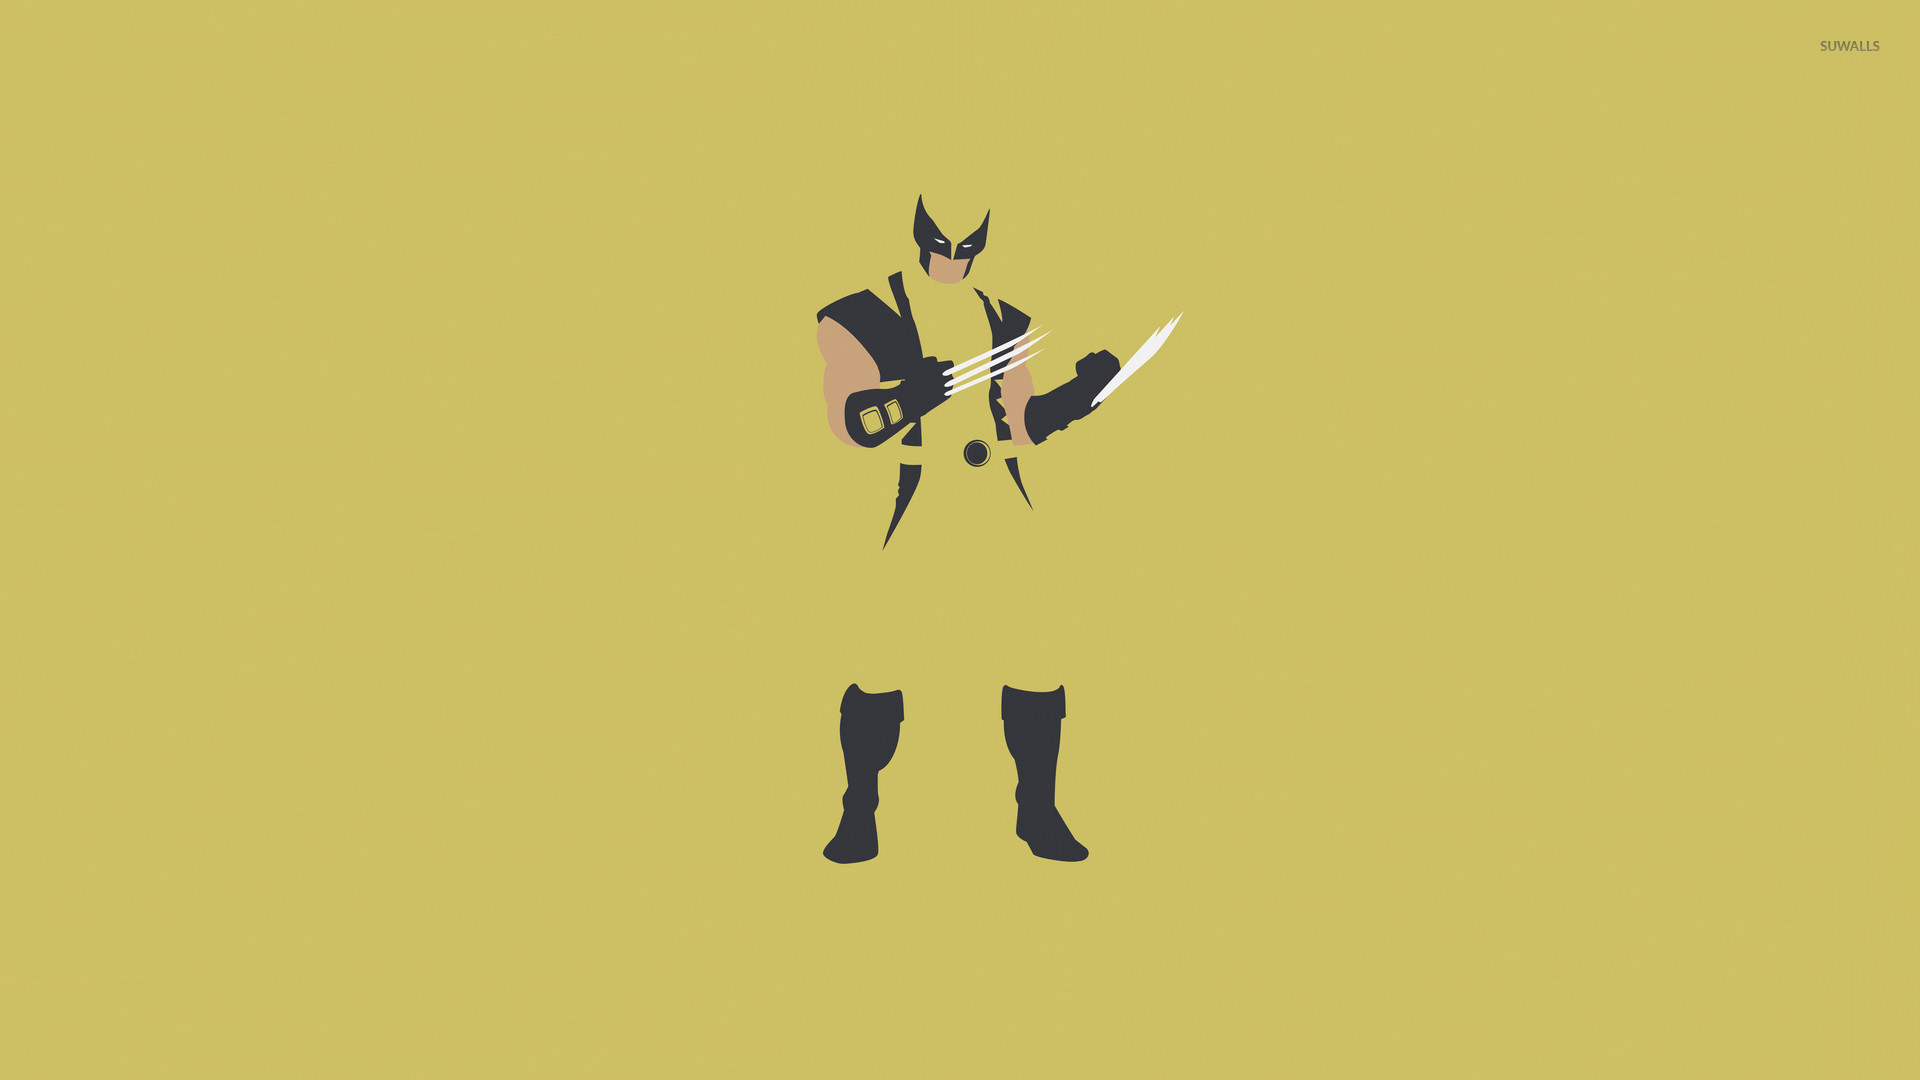 1920x1080 The claws of Wolverine wallpaper